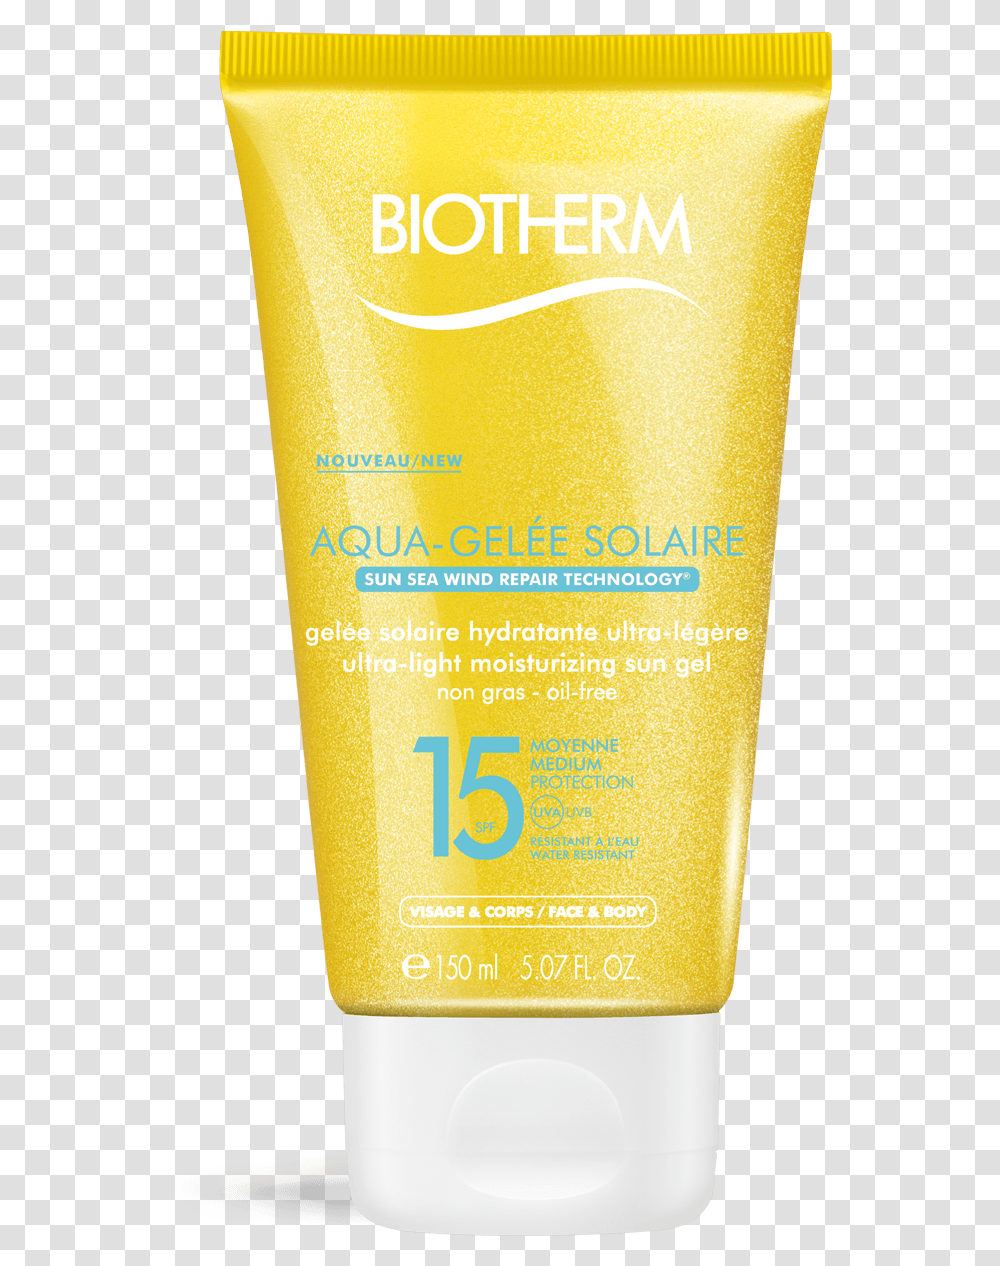 Aqua Gelee Solaire Spf 15 Biotherm, Bottle, Book, Sunscreen, Cosmetics Transparent Png